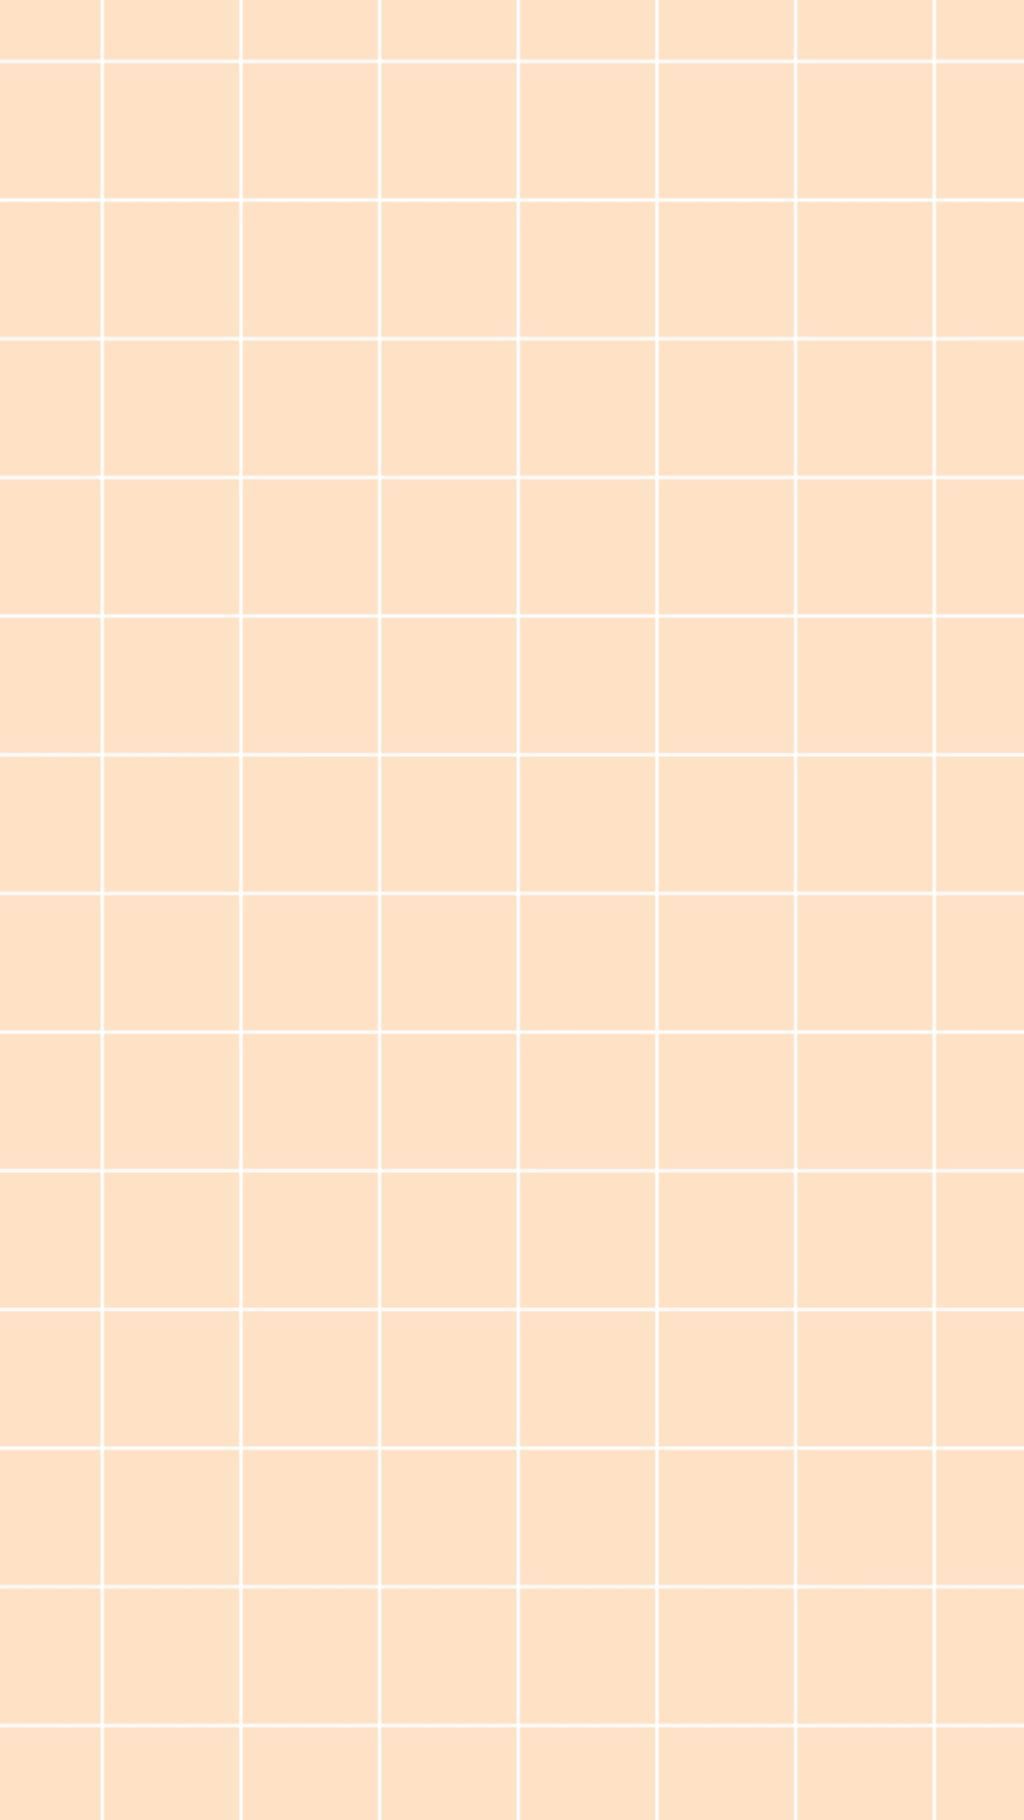 Peach background with a grid of white lines - Grid